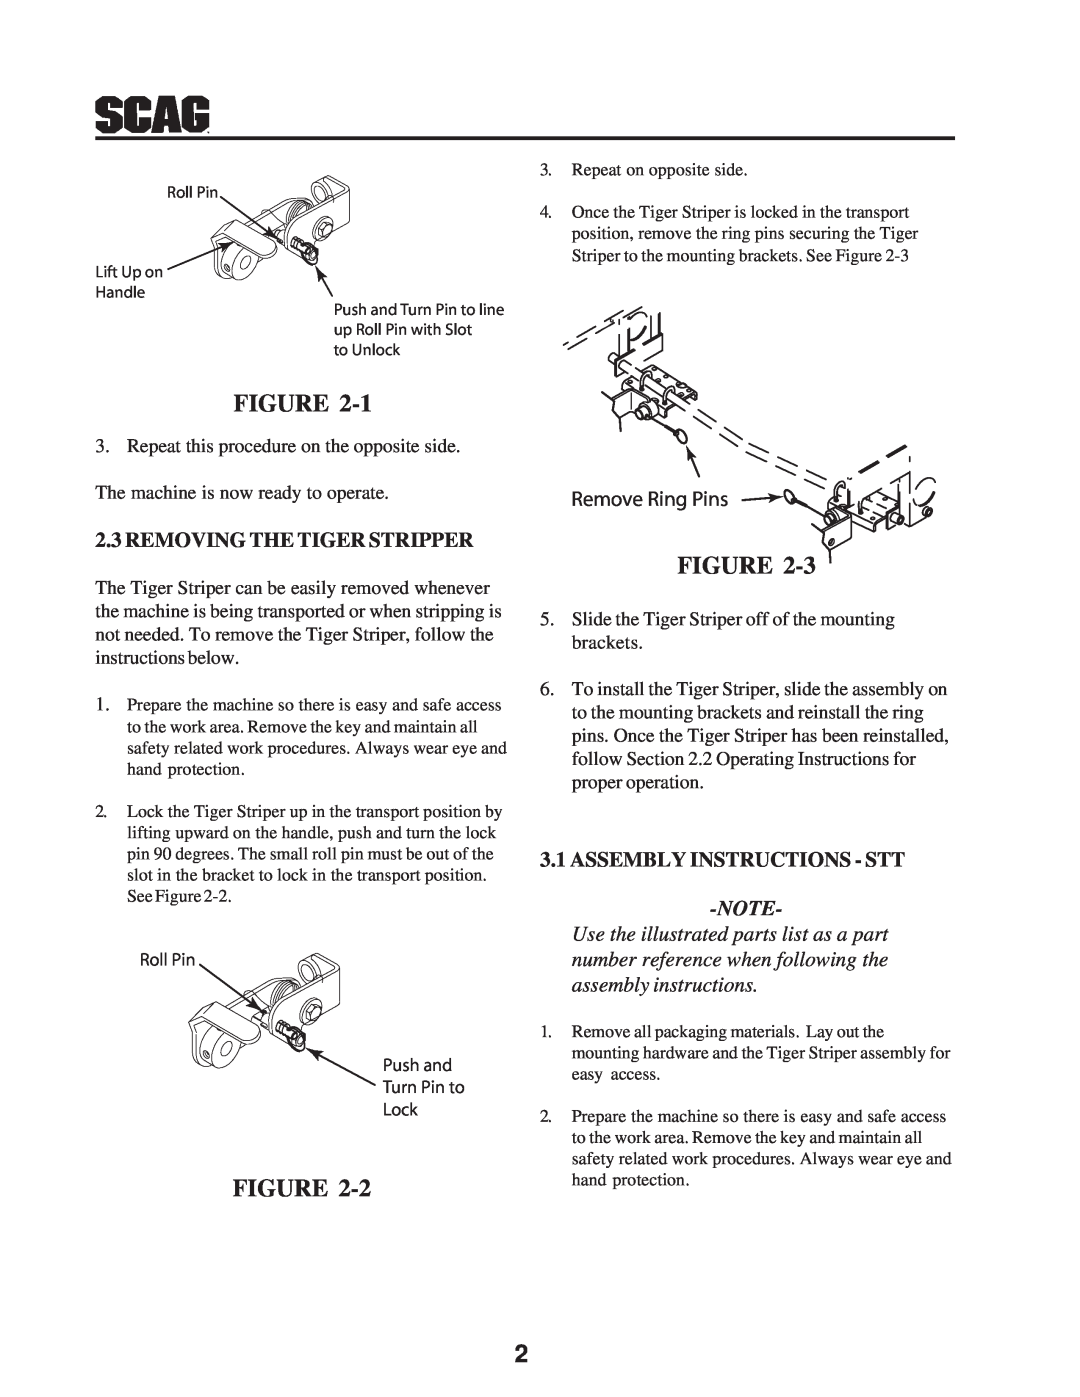 Scag Power Equipment 7630001 manual Removing The Tiger Stripper, Assembly Instructions - Stt, assembly instructions 